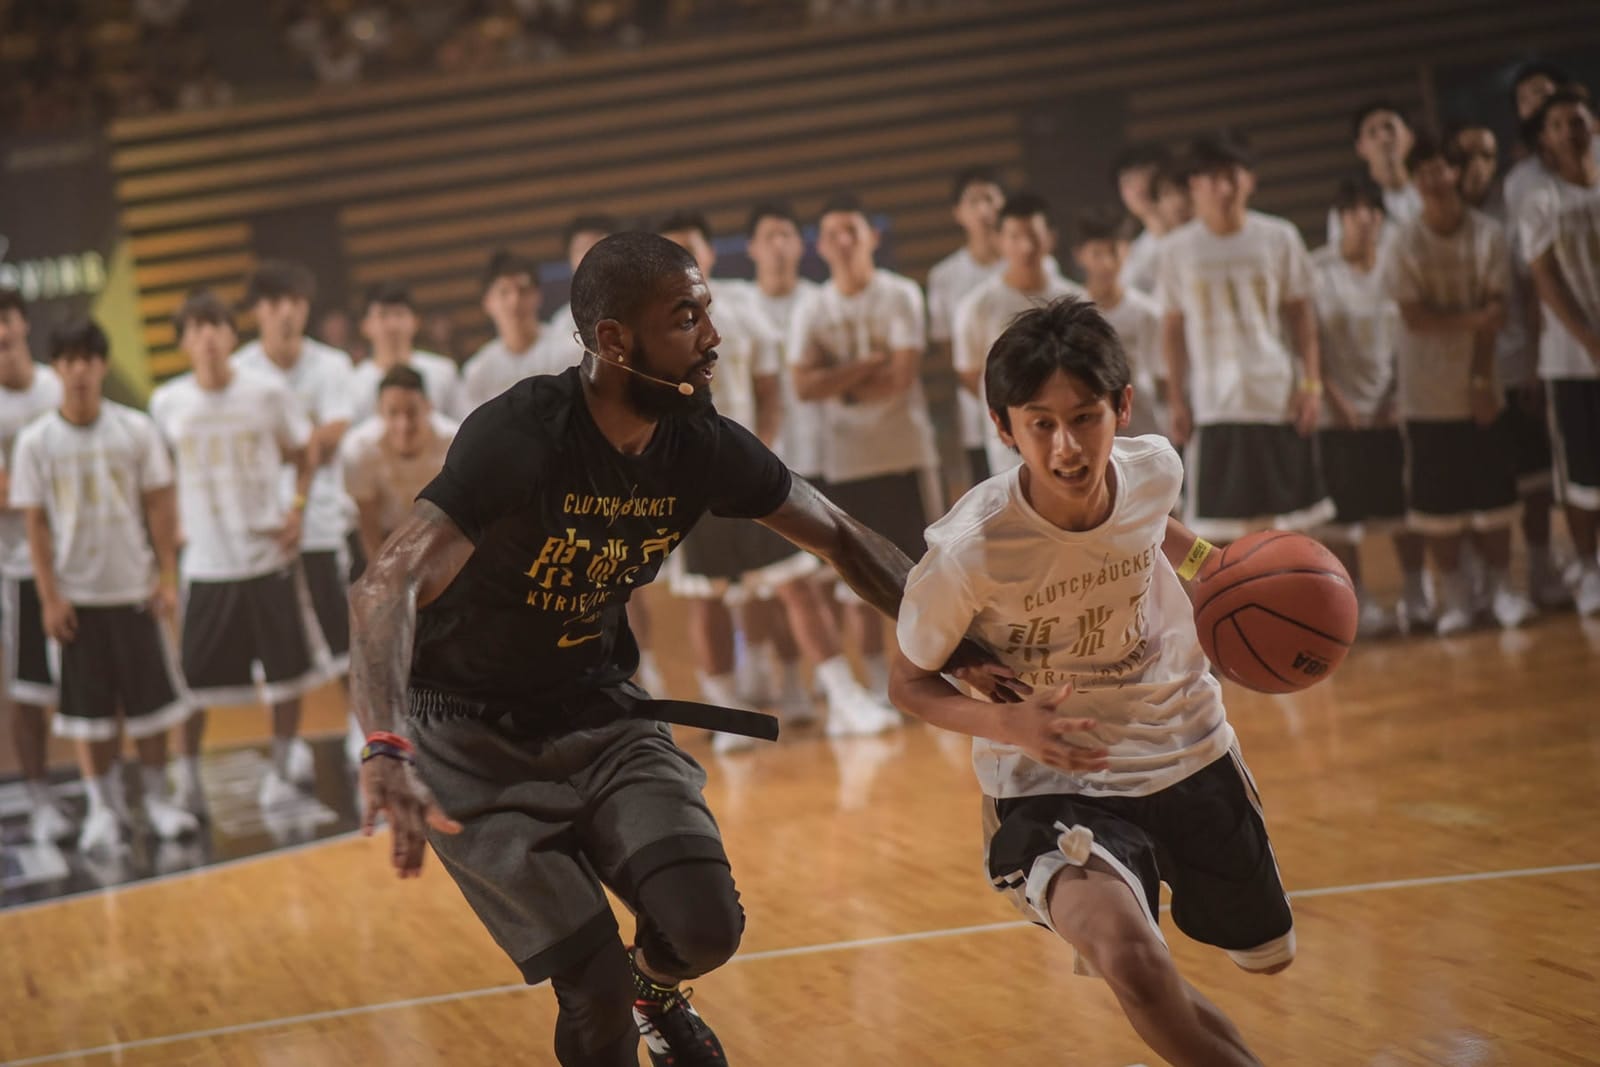 kyrie irving shoes tokyo